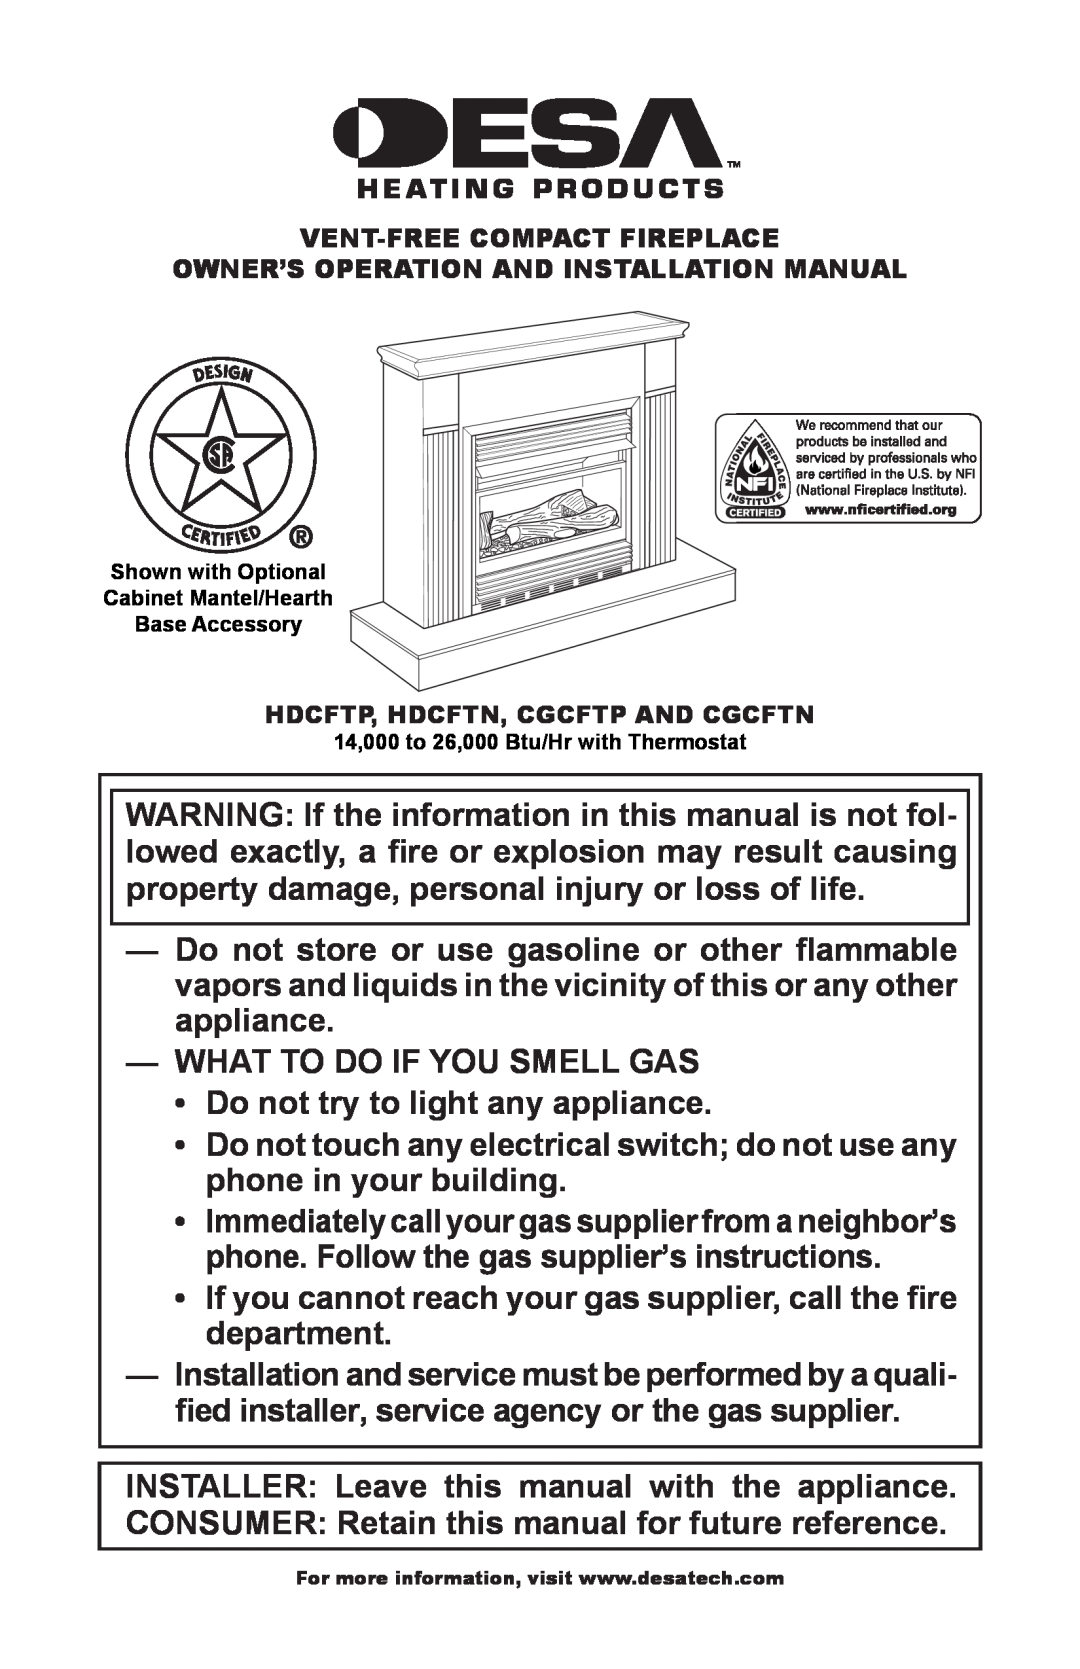 Desa HDCFTP, HDCFTN, CGCFTP, CGCFTN installation manual What To Do If You Smell Gas 